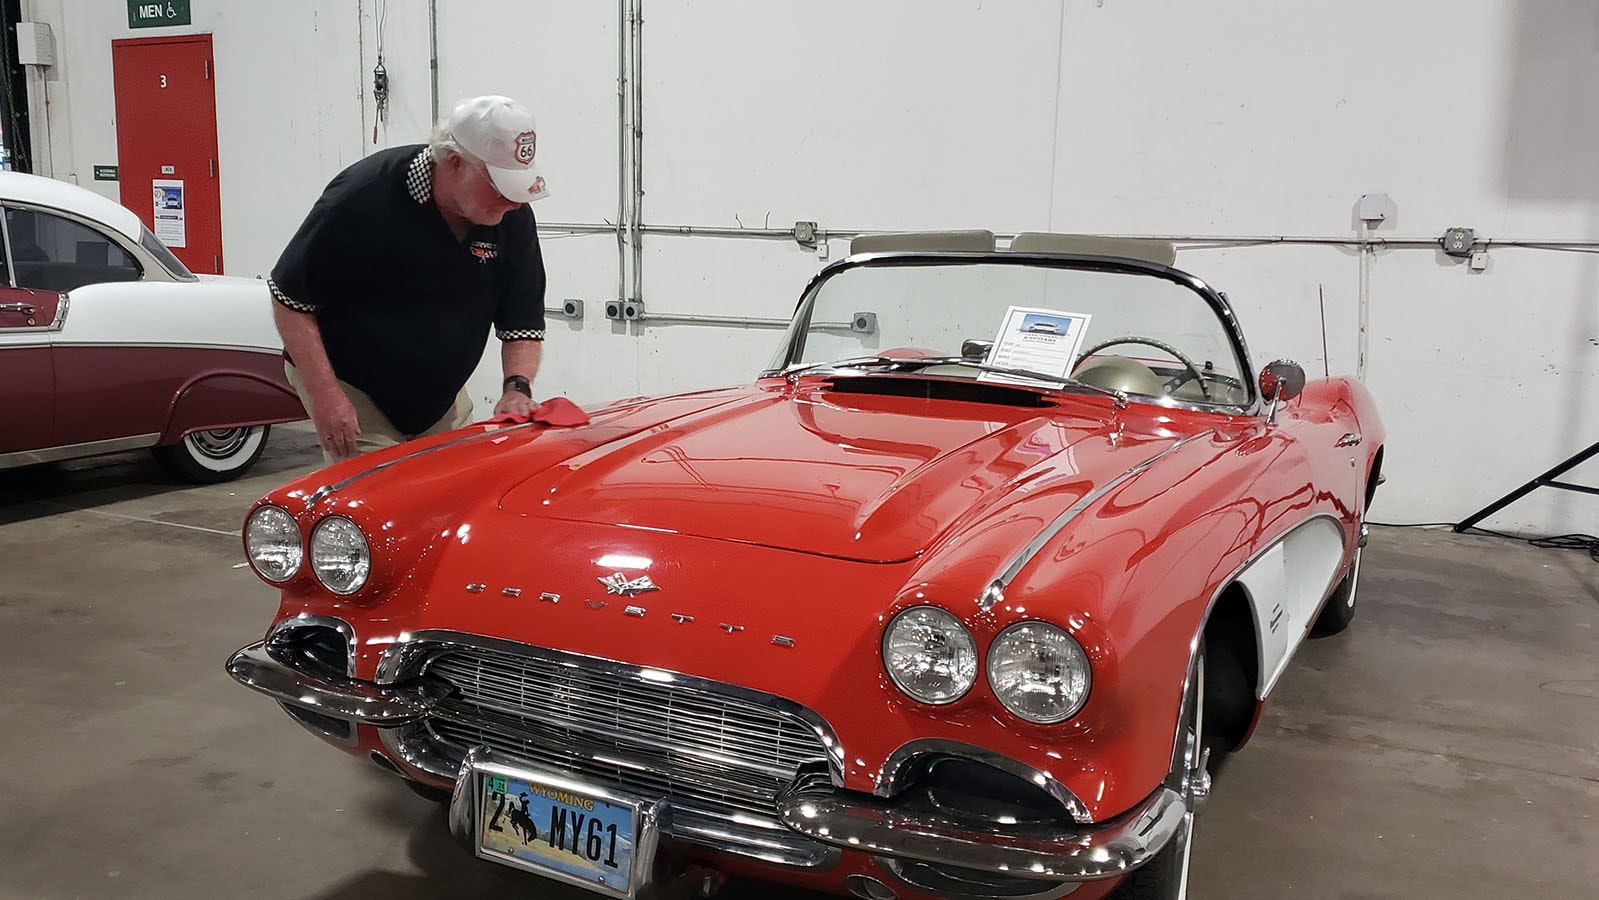 Randy Danclif polishes his 1961 Corvette after a brief downpour during the Cars, Cigars and Guitars charity fundraiser in Cheyenne.